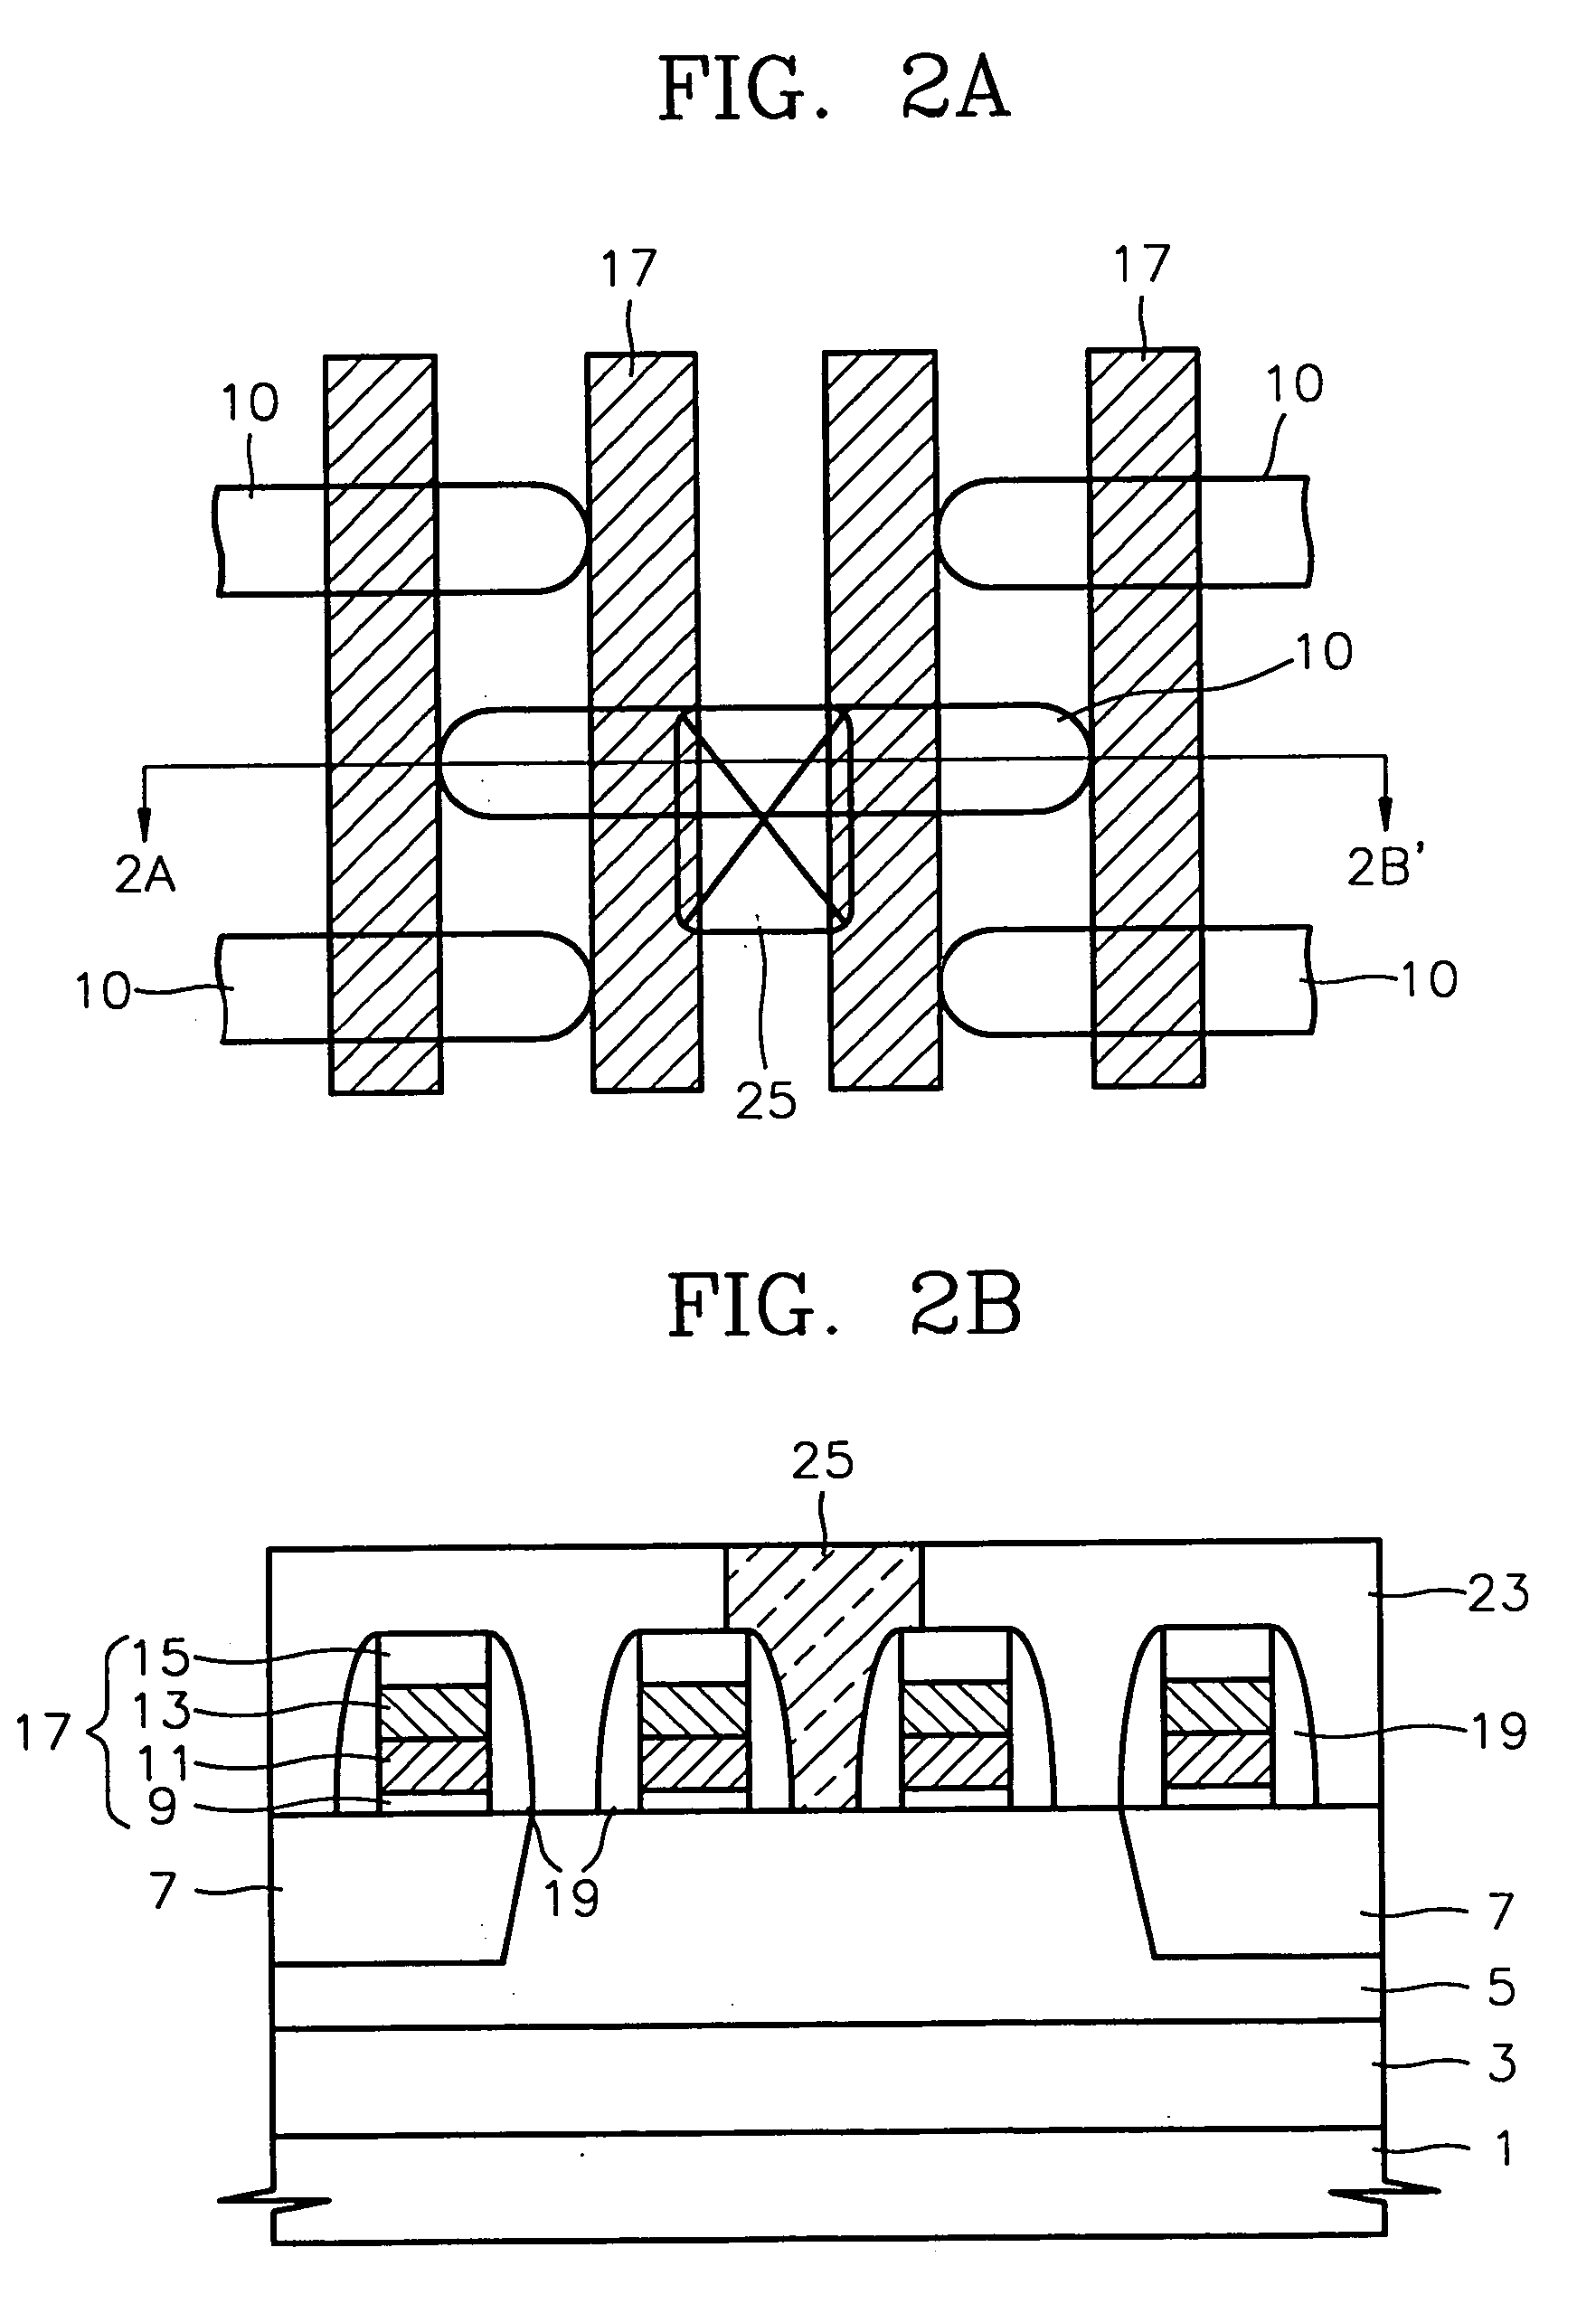 Semiconductor memory device having self-aligned contacts and method of fabricating the same